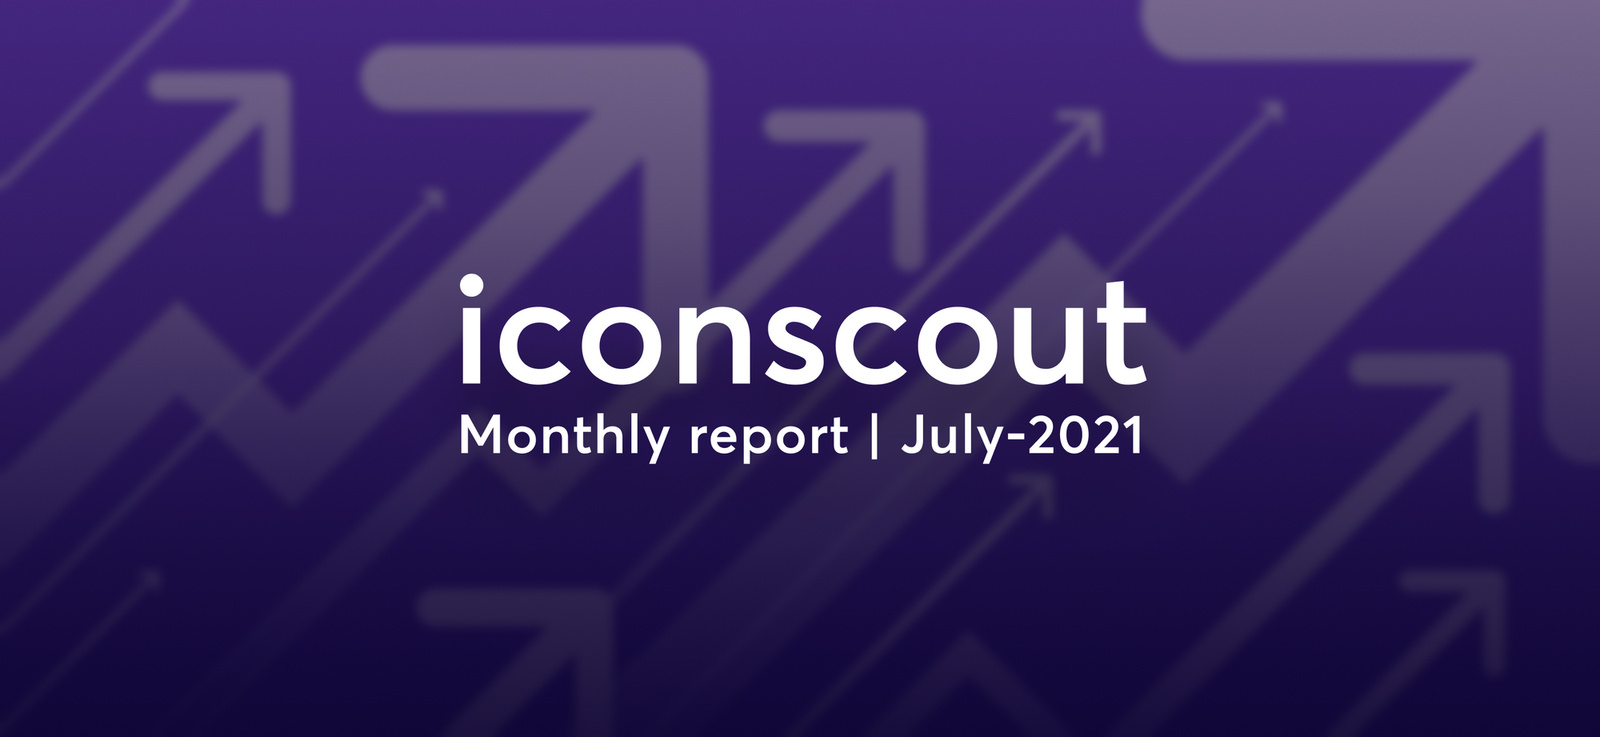 Iconscout Product Update: What's new from July'21